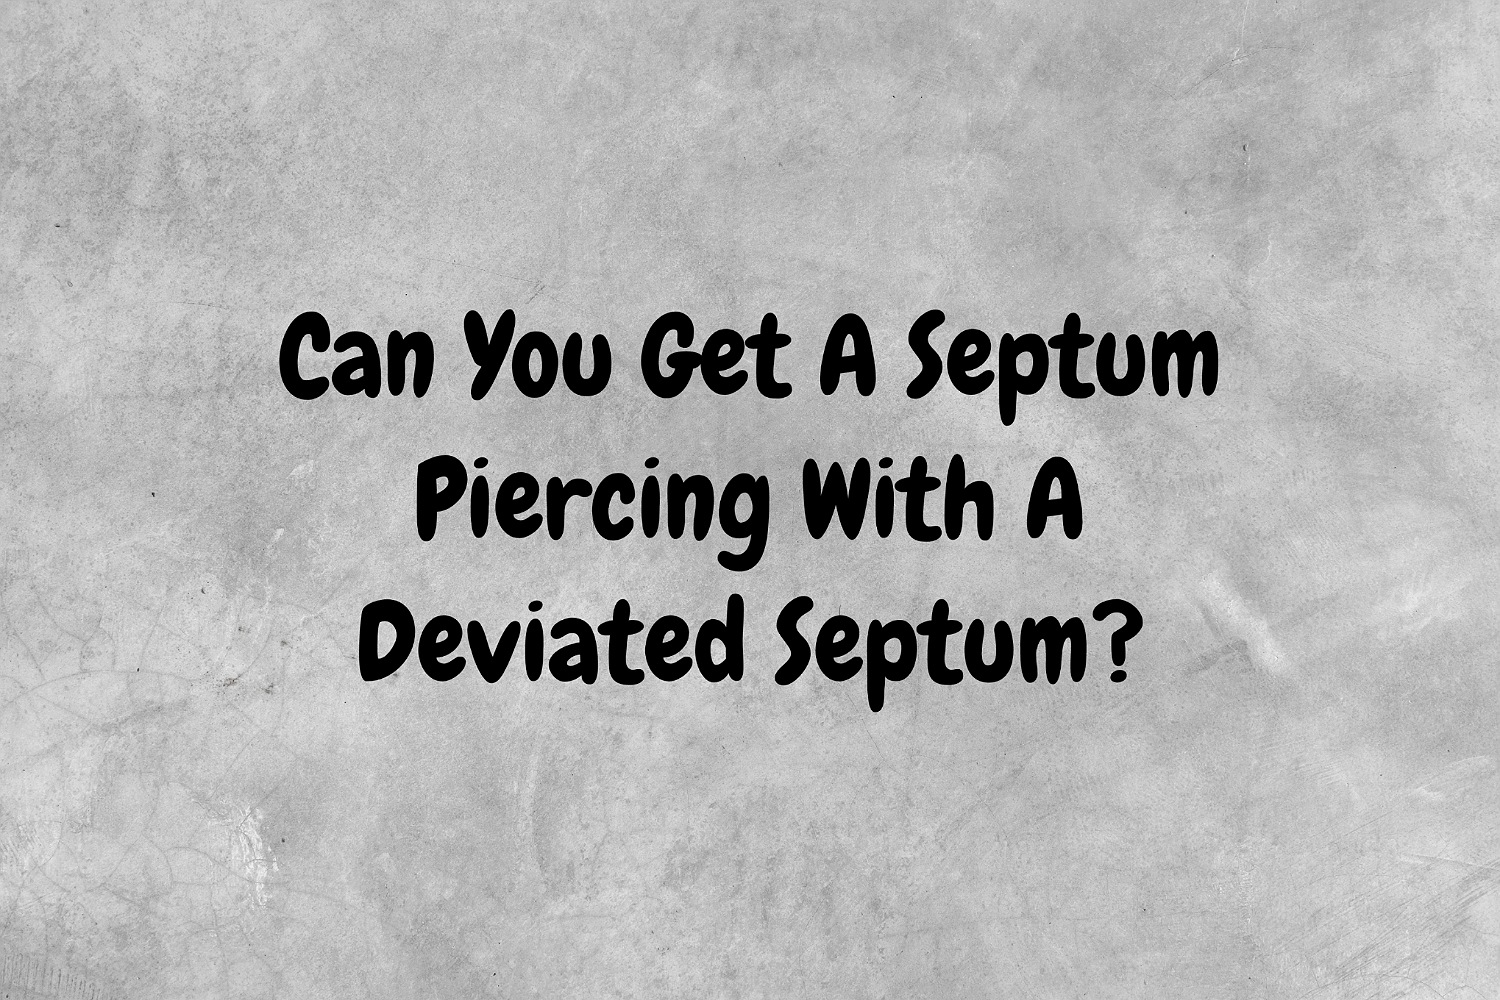 An image with a gray background that has black text posing the question, "Can you get a septum piercing with a deviated septum? "